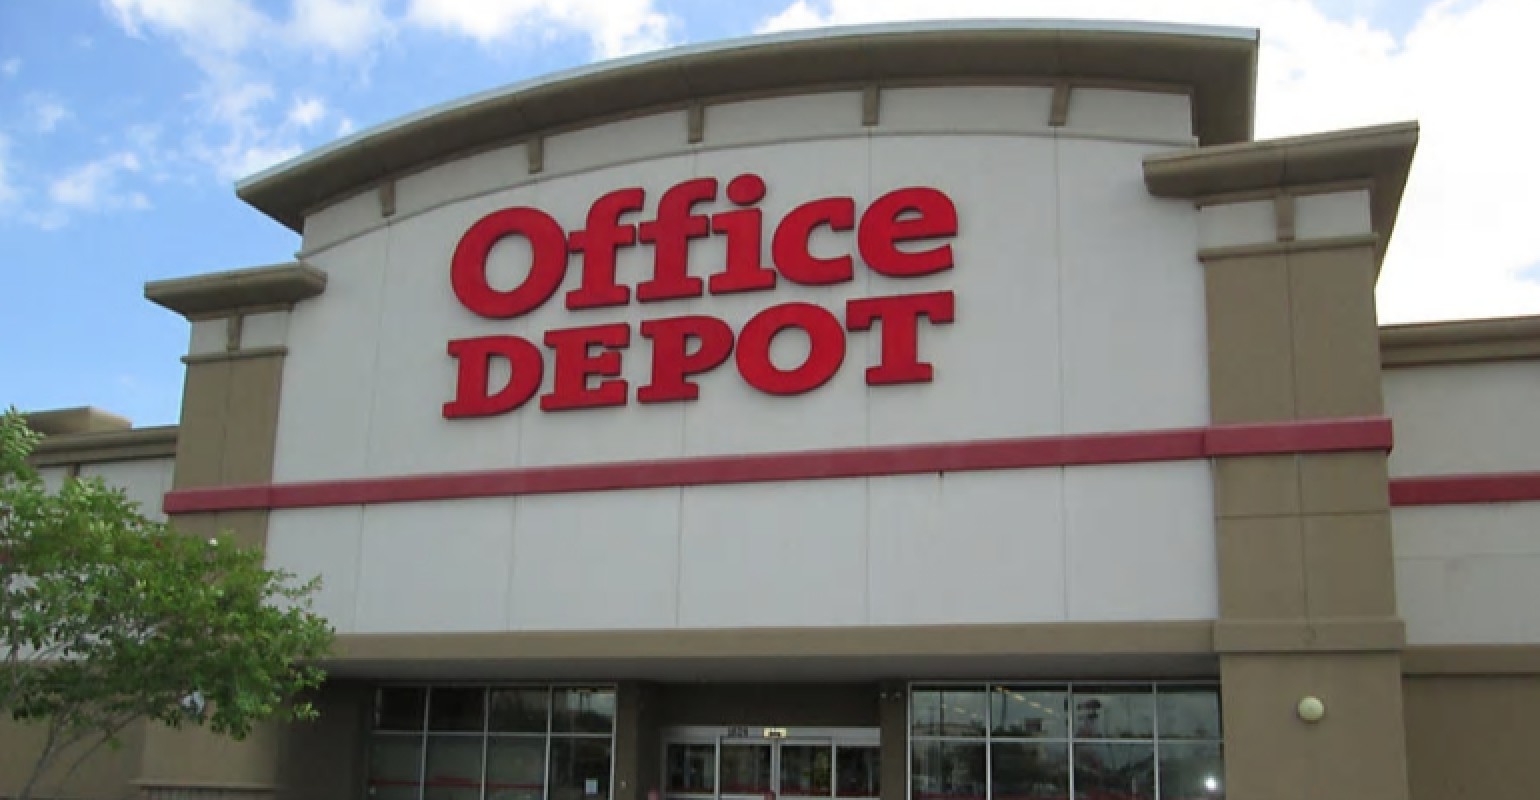 Shipt launches same-day delivery with Office Depot | Supermarket News